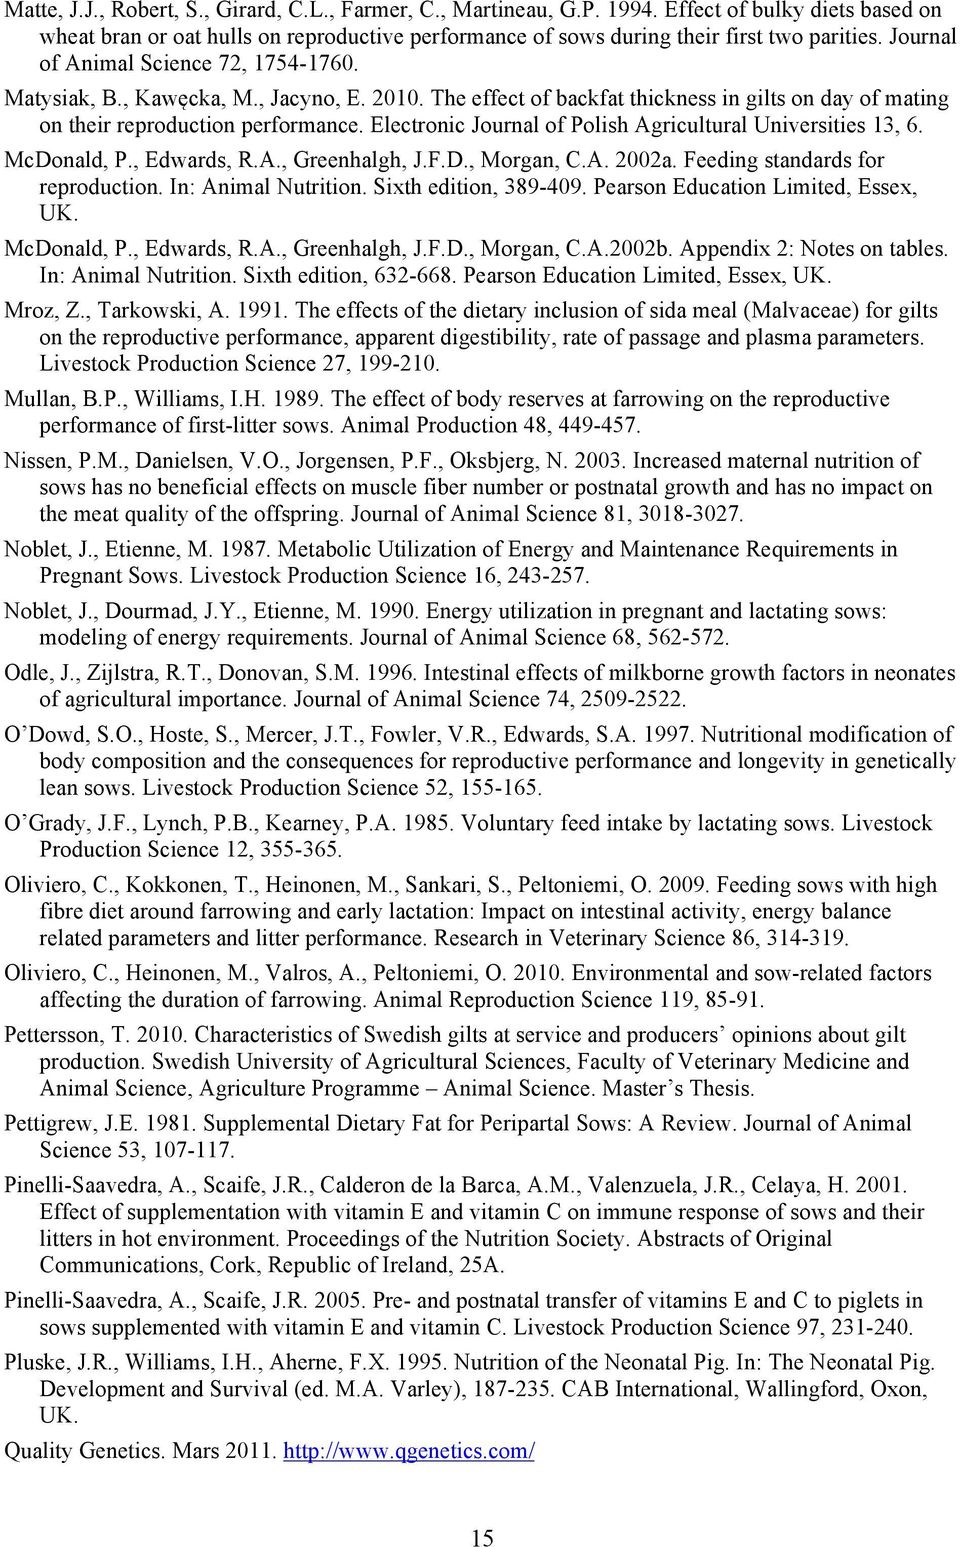 Electronic Journal of Polish Agricultural Universities 13, 6. McDonald, P., Edwards, R.A., Greenhalgh, J.F.D., Morgan, C.A. 2002a. Feeding standards for reproduction. In: Animal Nutrition.